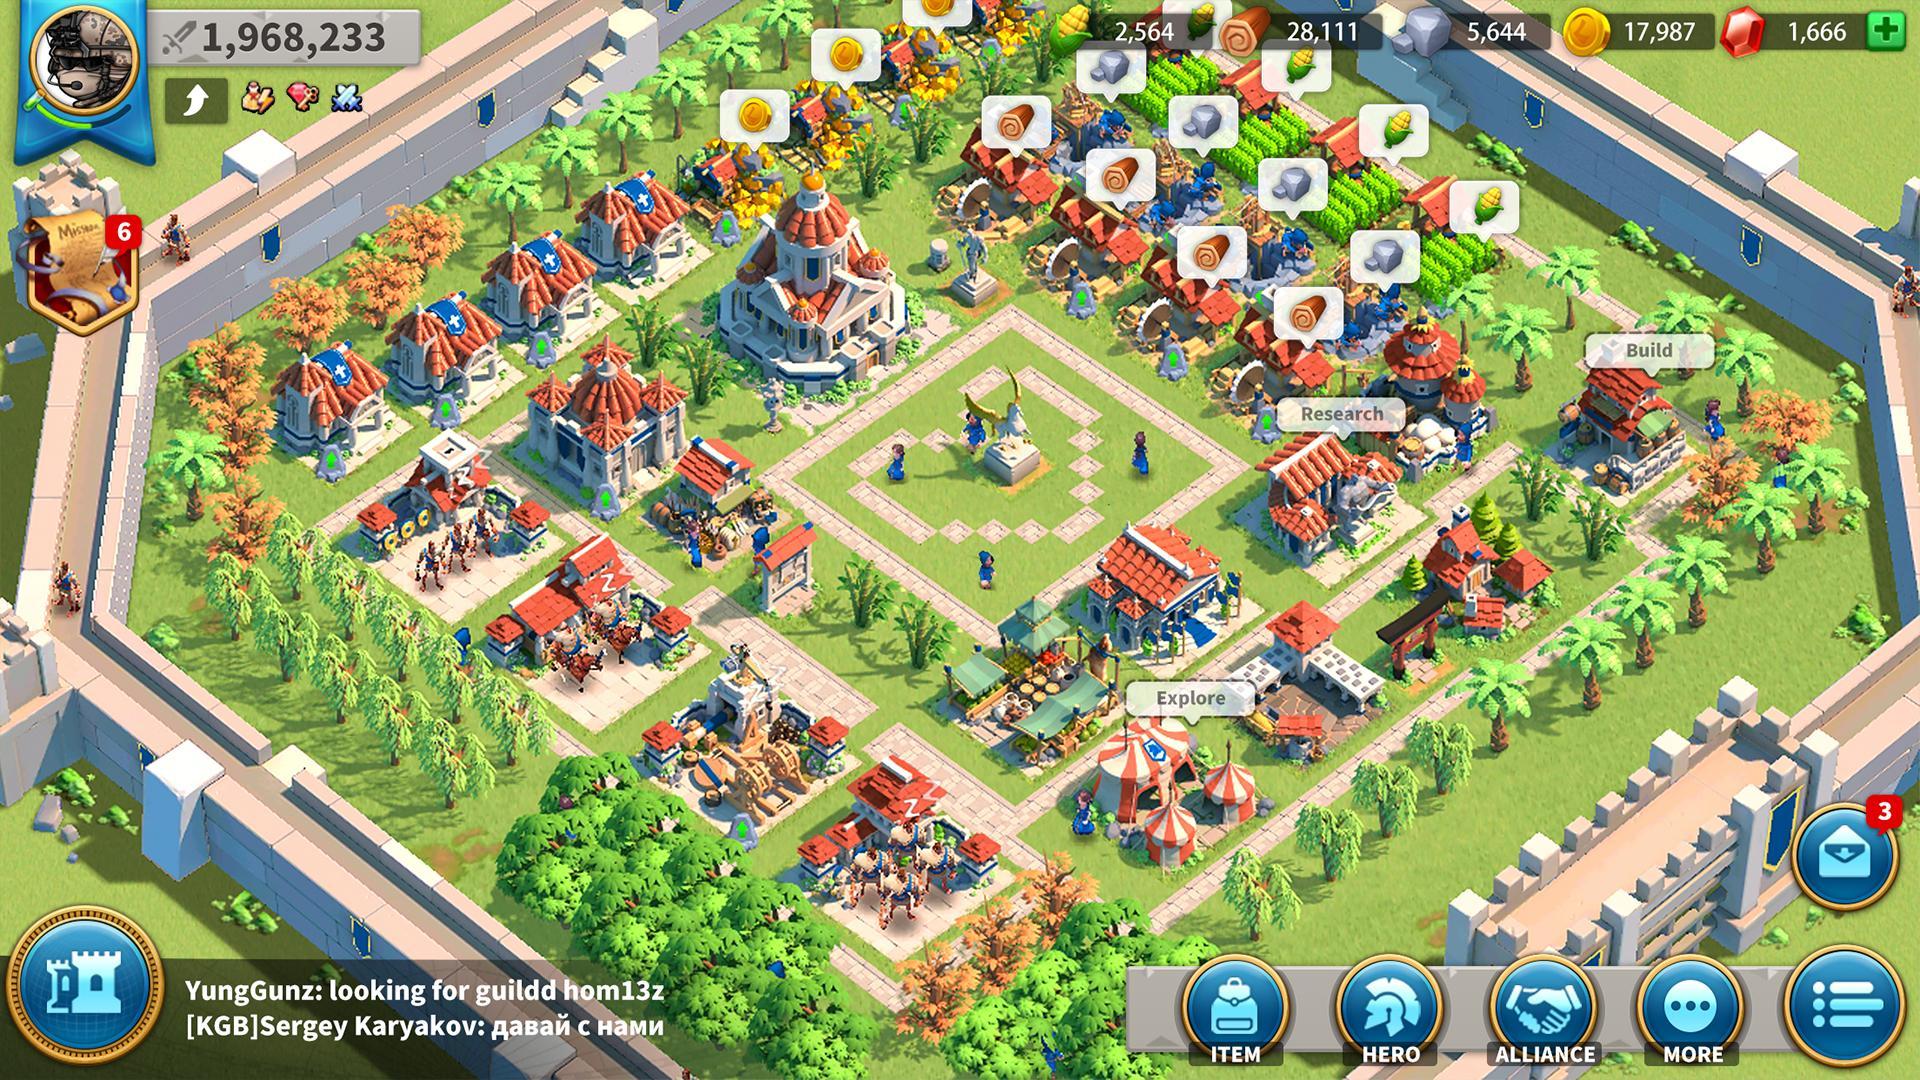 Rise of Kingdoms for Android - APK Download